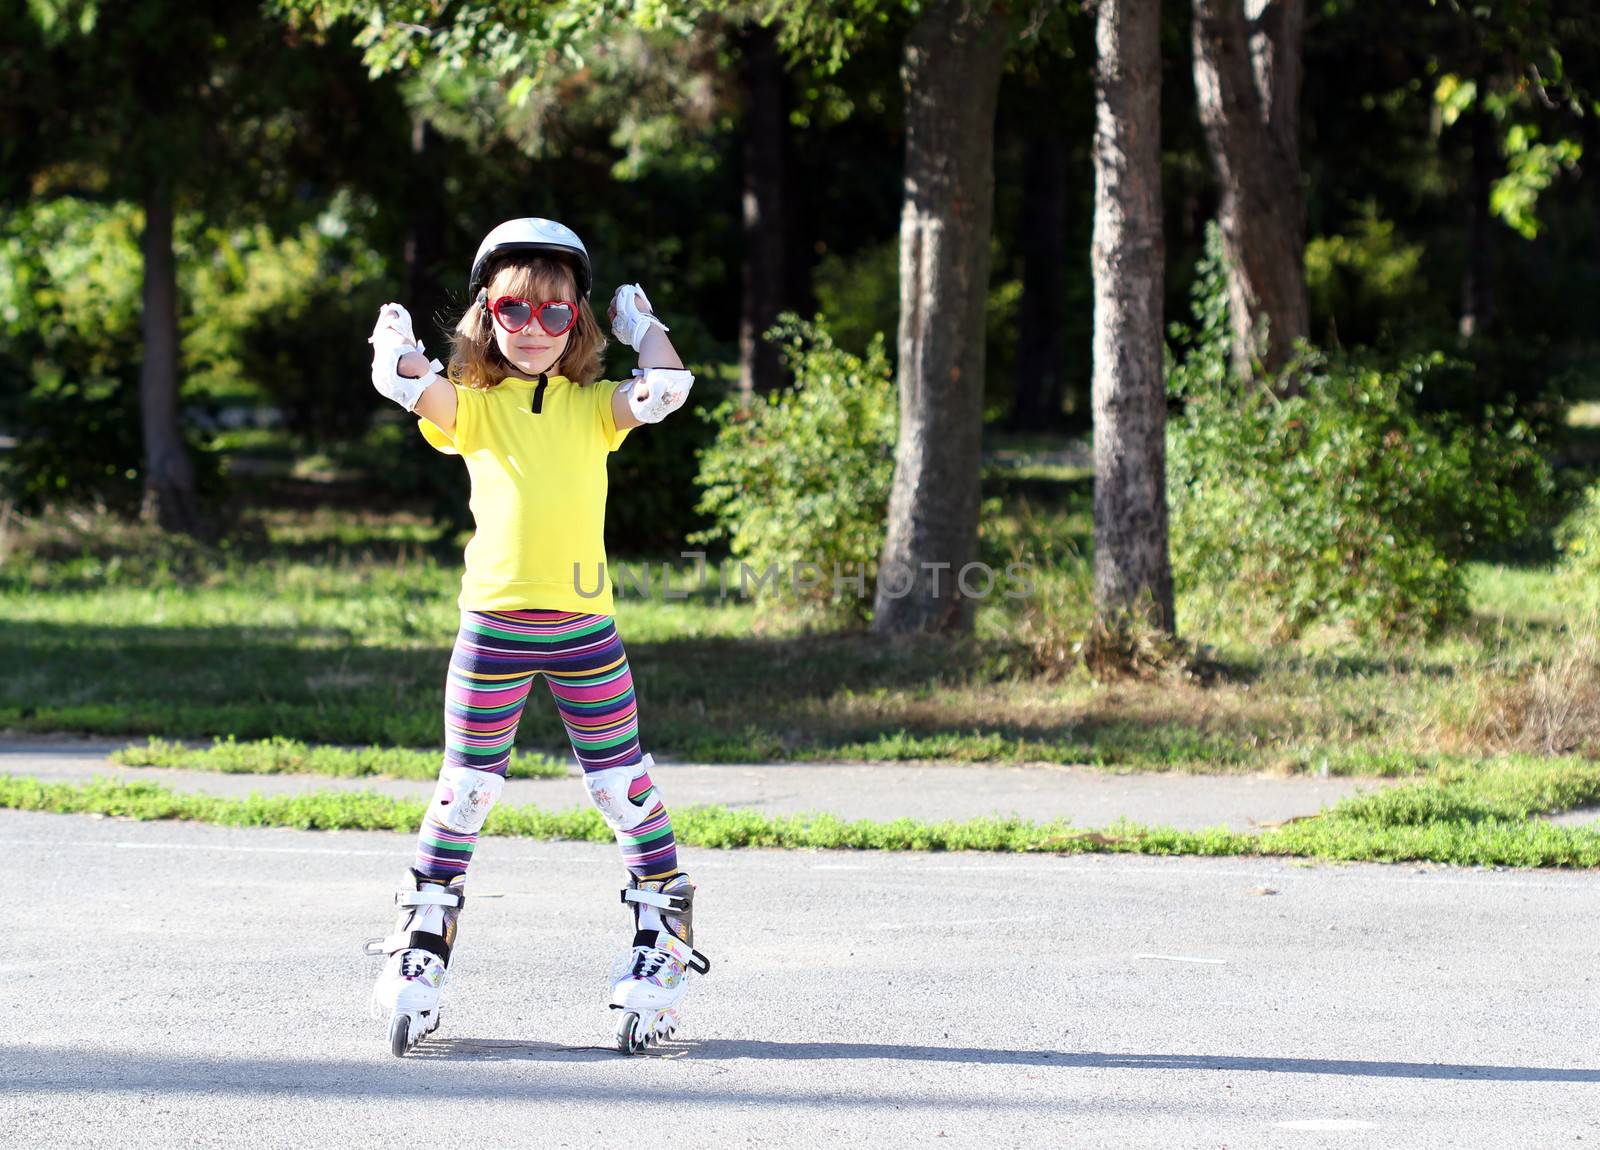 Roller skating happy little girl with protective gear